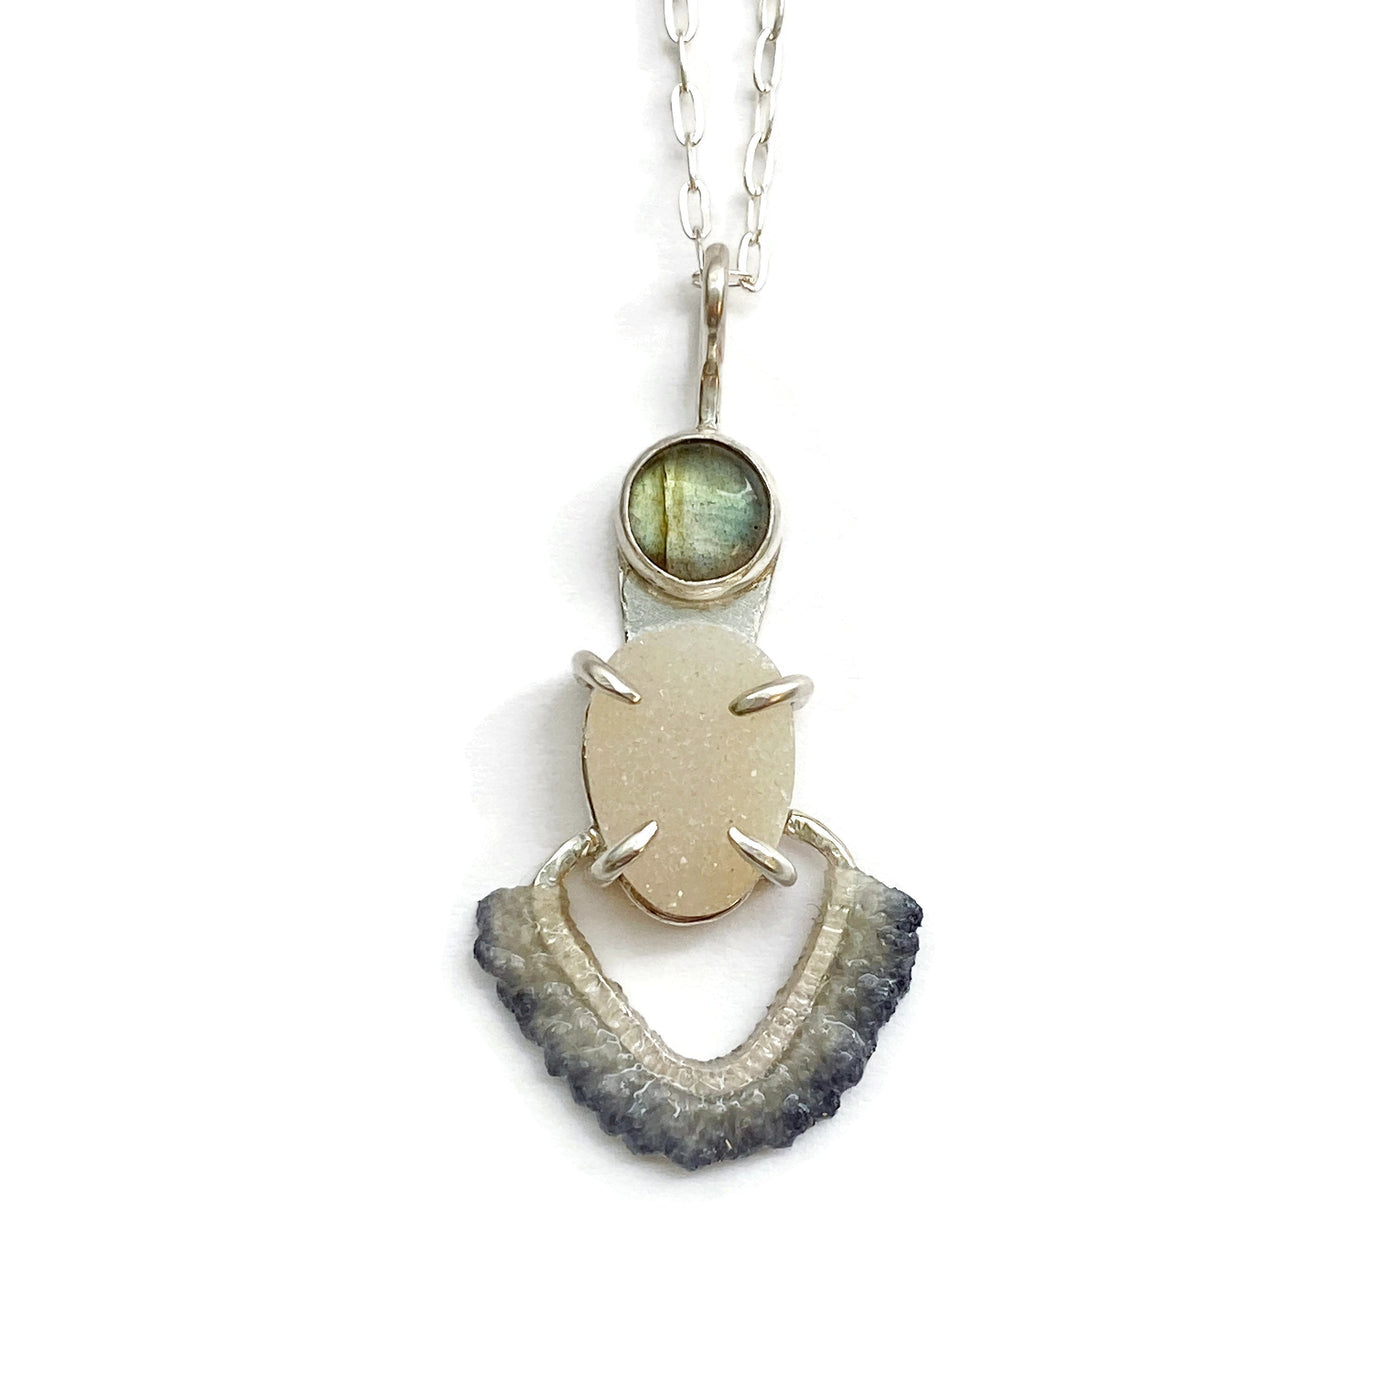 Pathway Necklace in Labradorite & Druzy // One-of-a-Kind-Necklaces-Twyla Dill-Seattle Jewelry-Handmade Jewelry-Seattle Jeweler-Twyla Dill